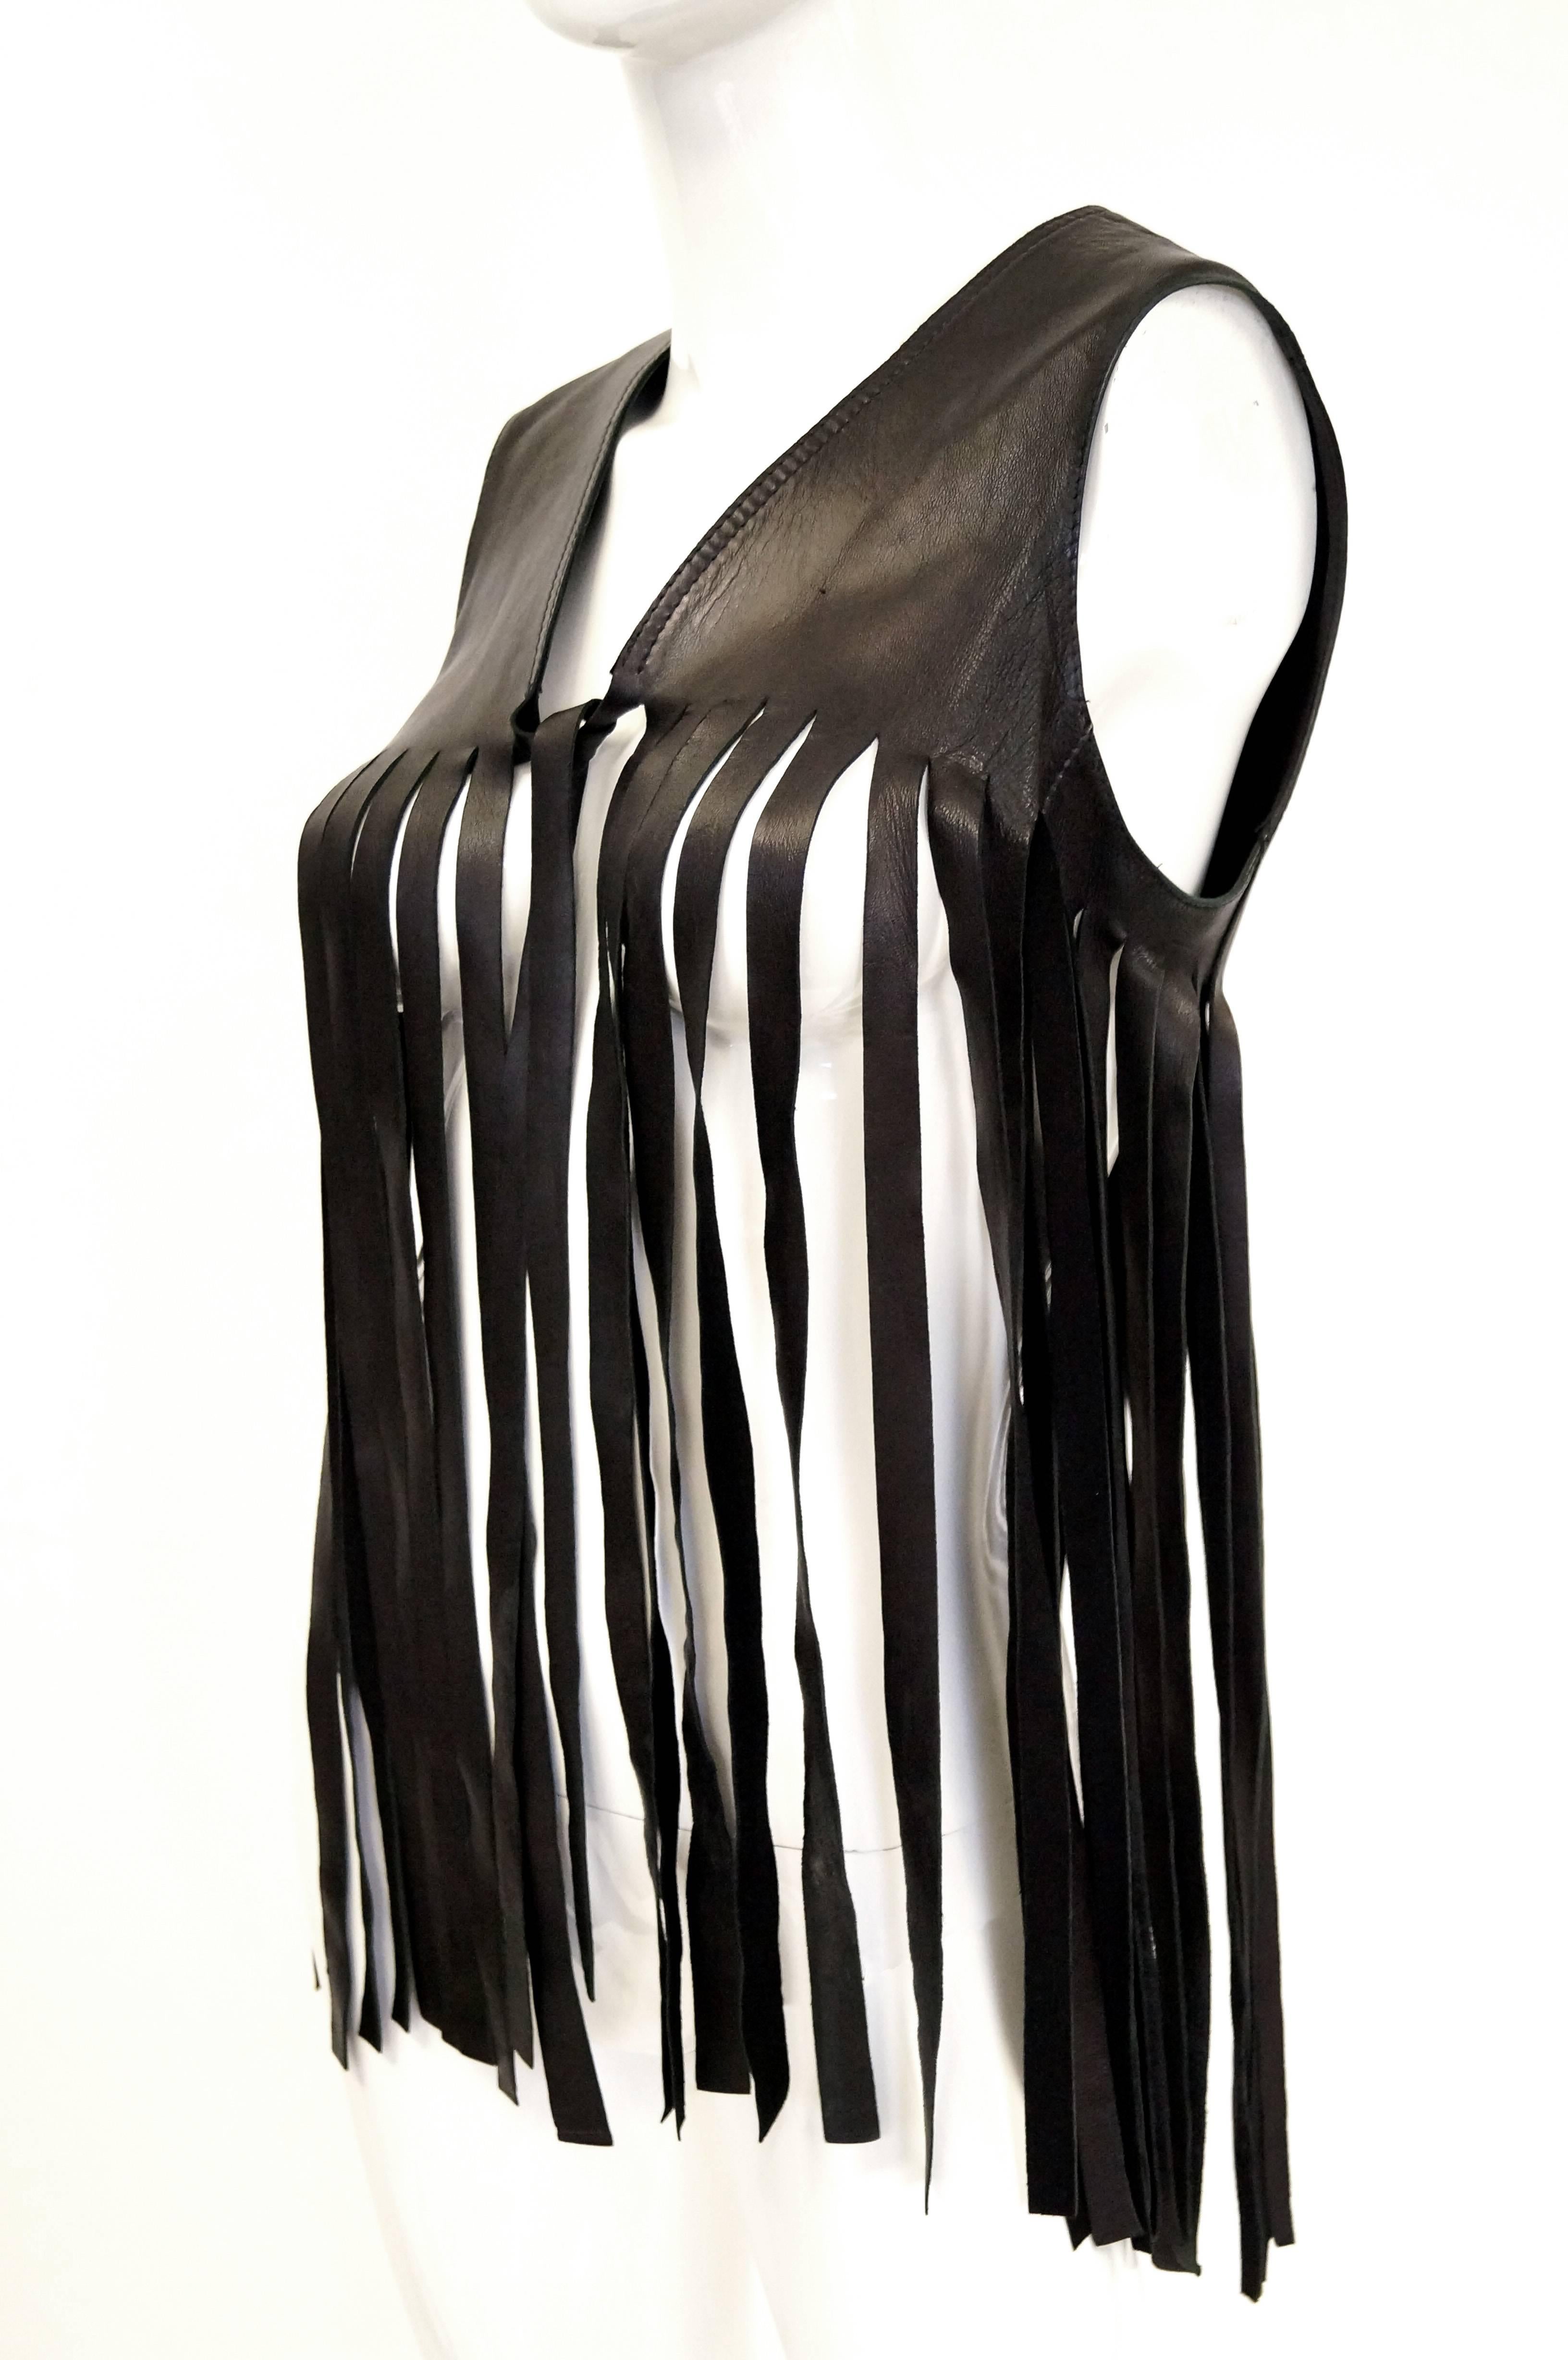 Fantastic fringe leather vest. Dress it up or wear it casual. Can be paired with oh so many things. Fantastic!